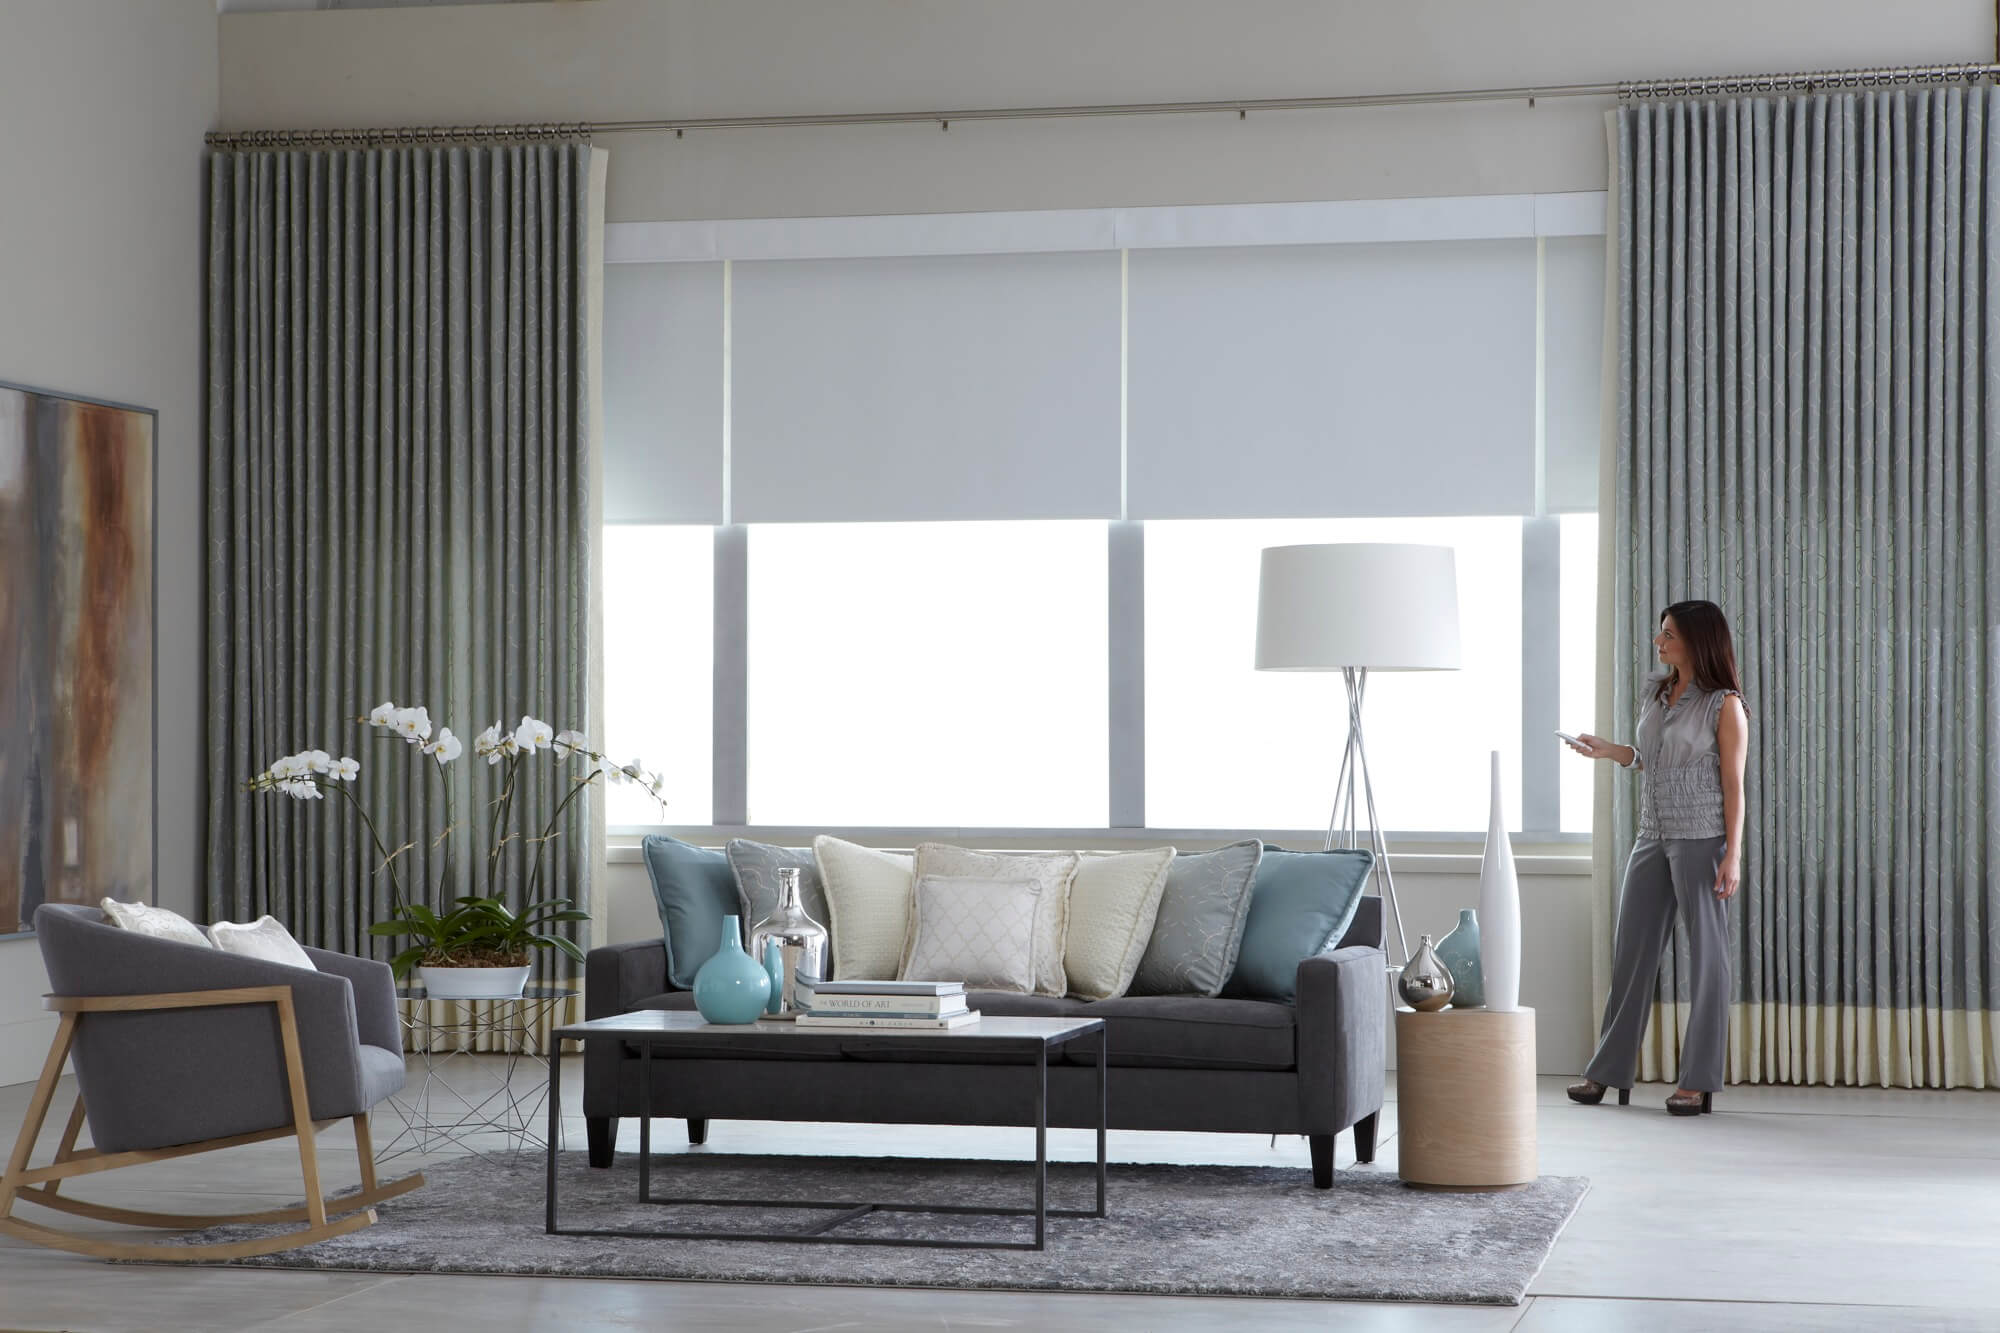 Grey motorized window shades in a high ceiling living room